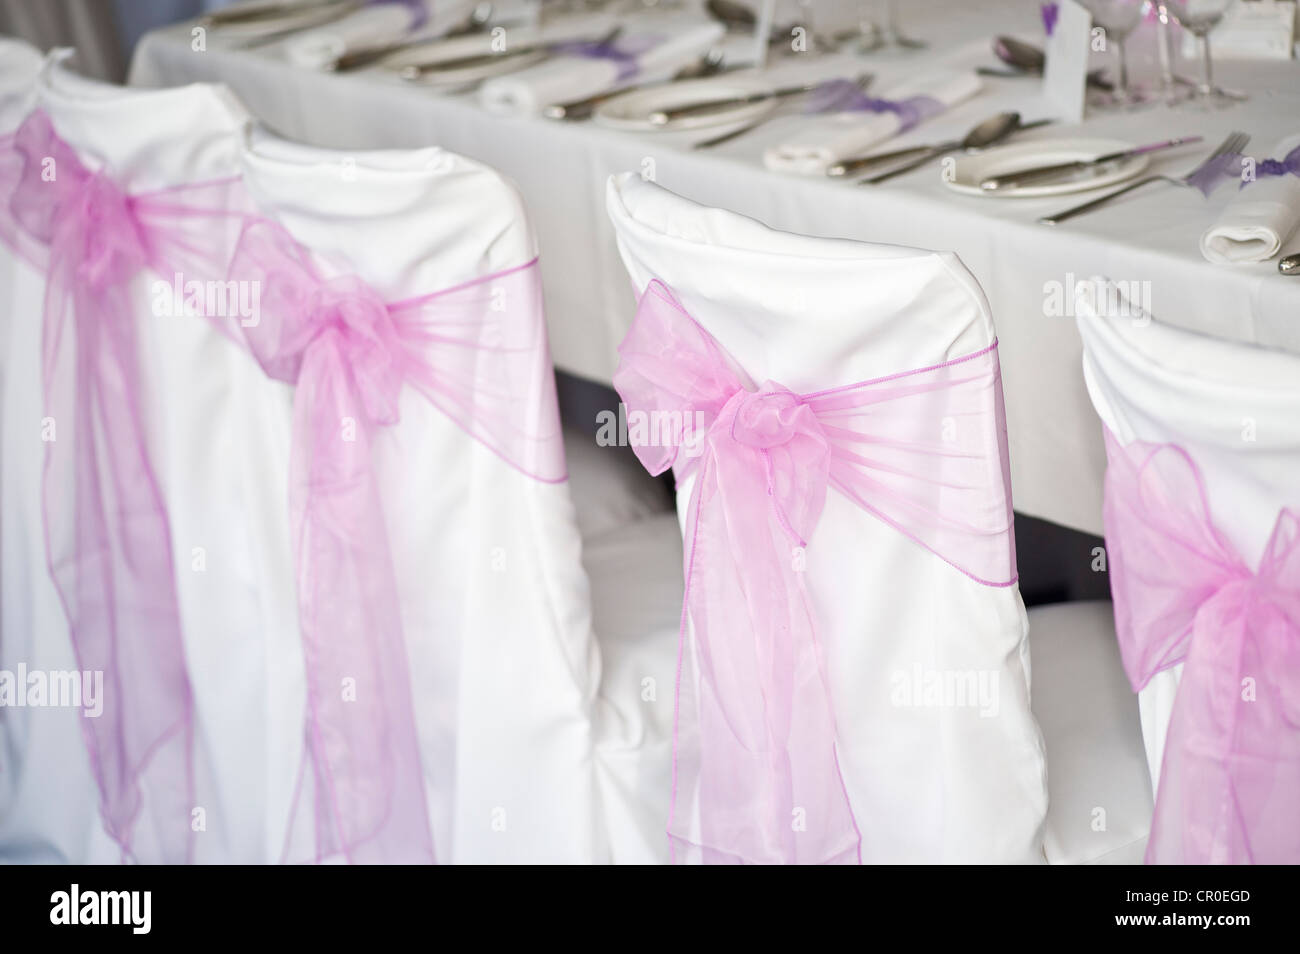 Backs Of Chairs At Wedding Reception With Pink Chiffon Bows And